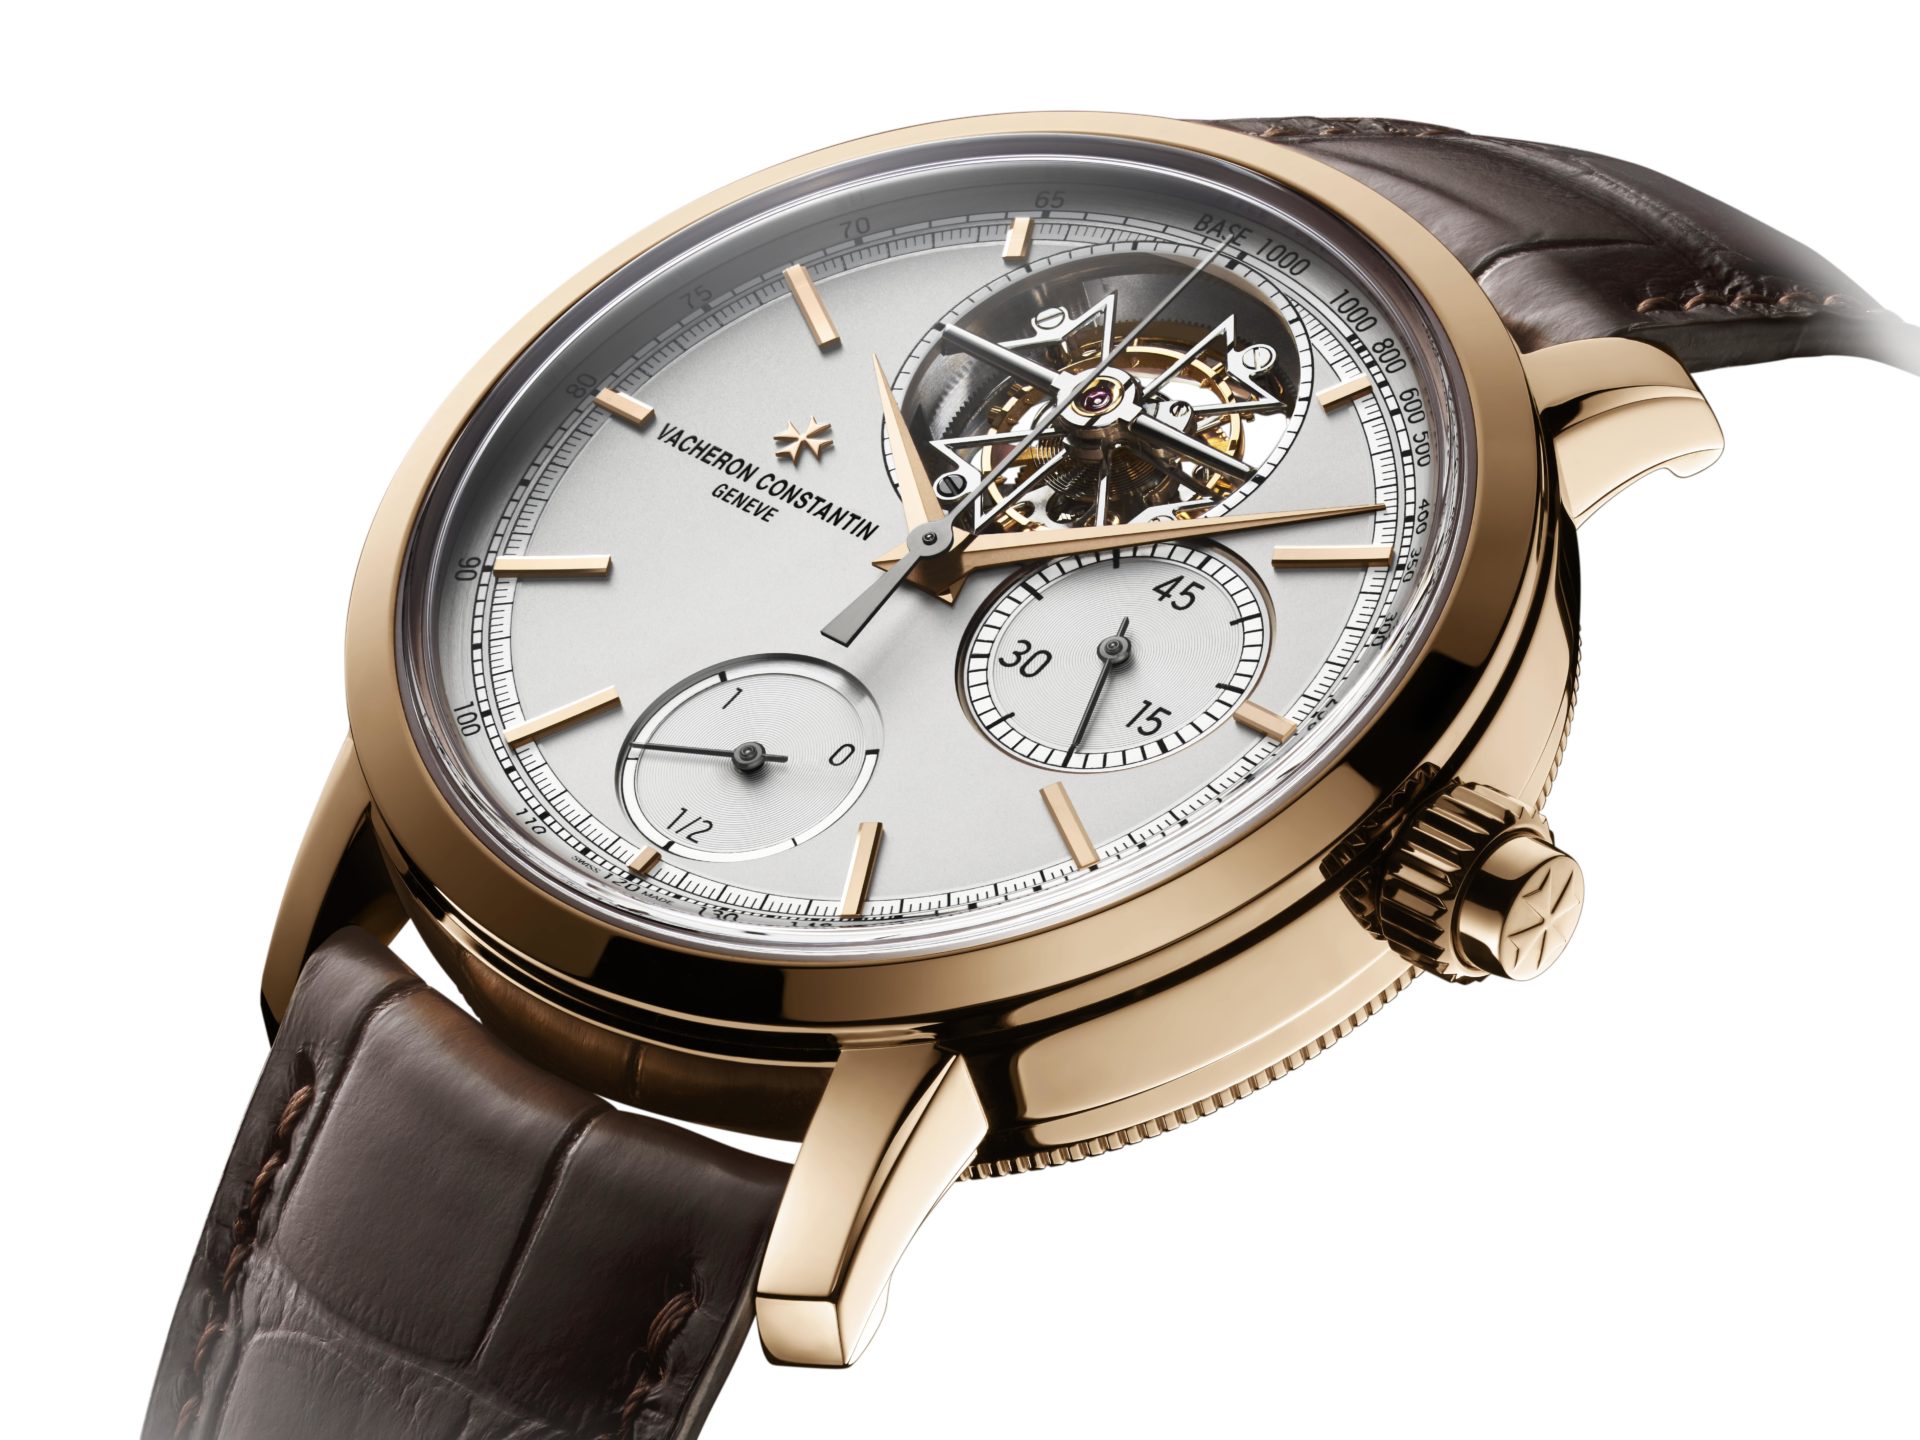 Vacheron Constantin Debuts a Racy New Version of Its Beloved